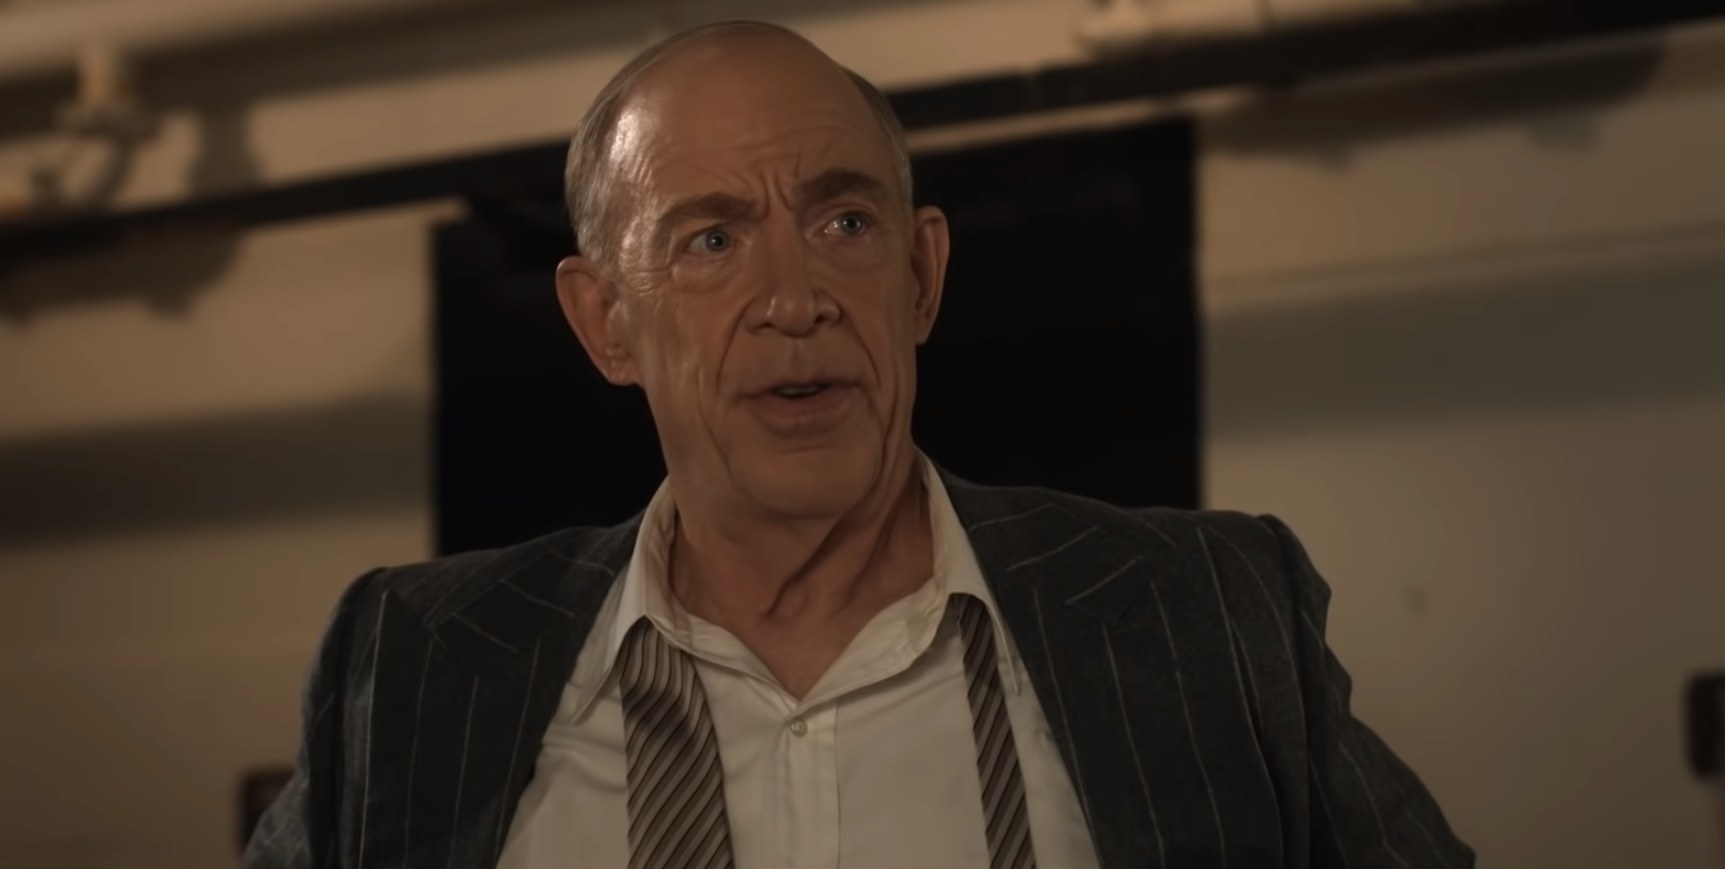 JK Simmons in a shirt, undone tie, and suit jacket